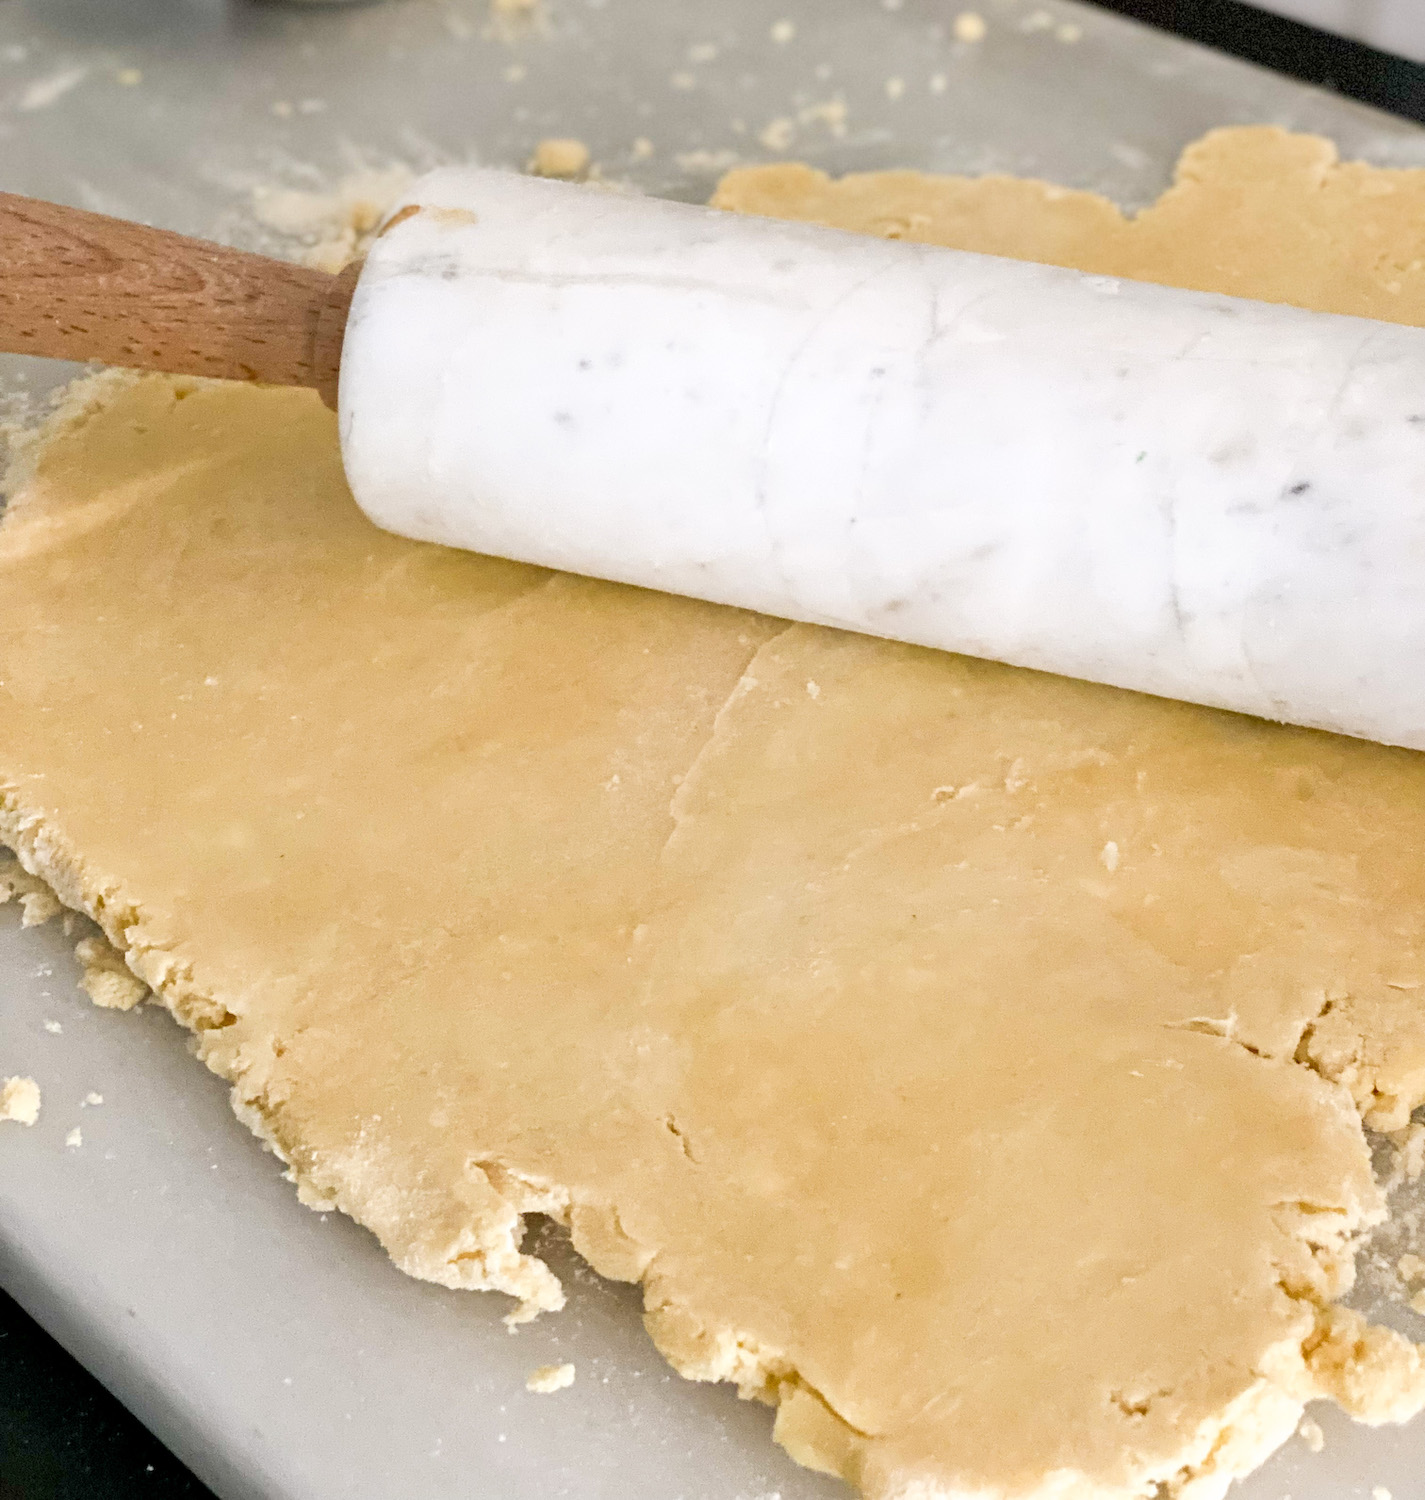 Marble rolling pin with wooden handles on top of yellow pie dough, surrounded by flour and dough crumbs. background marble dough board